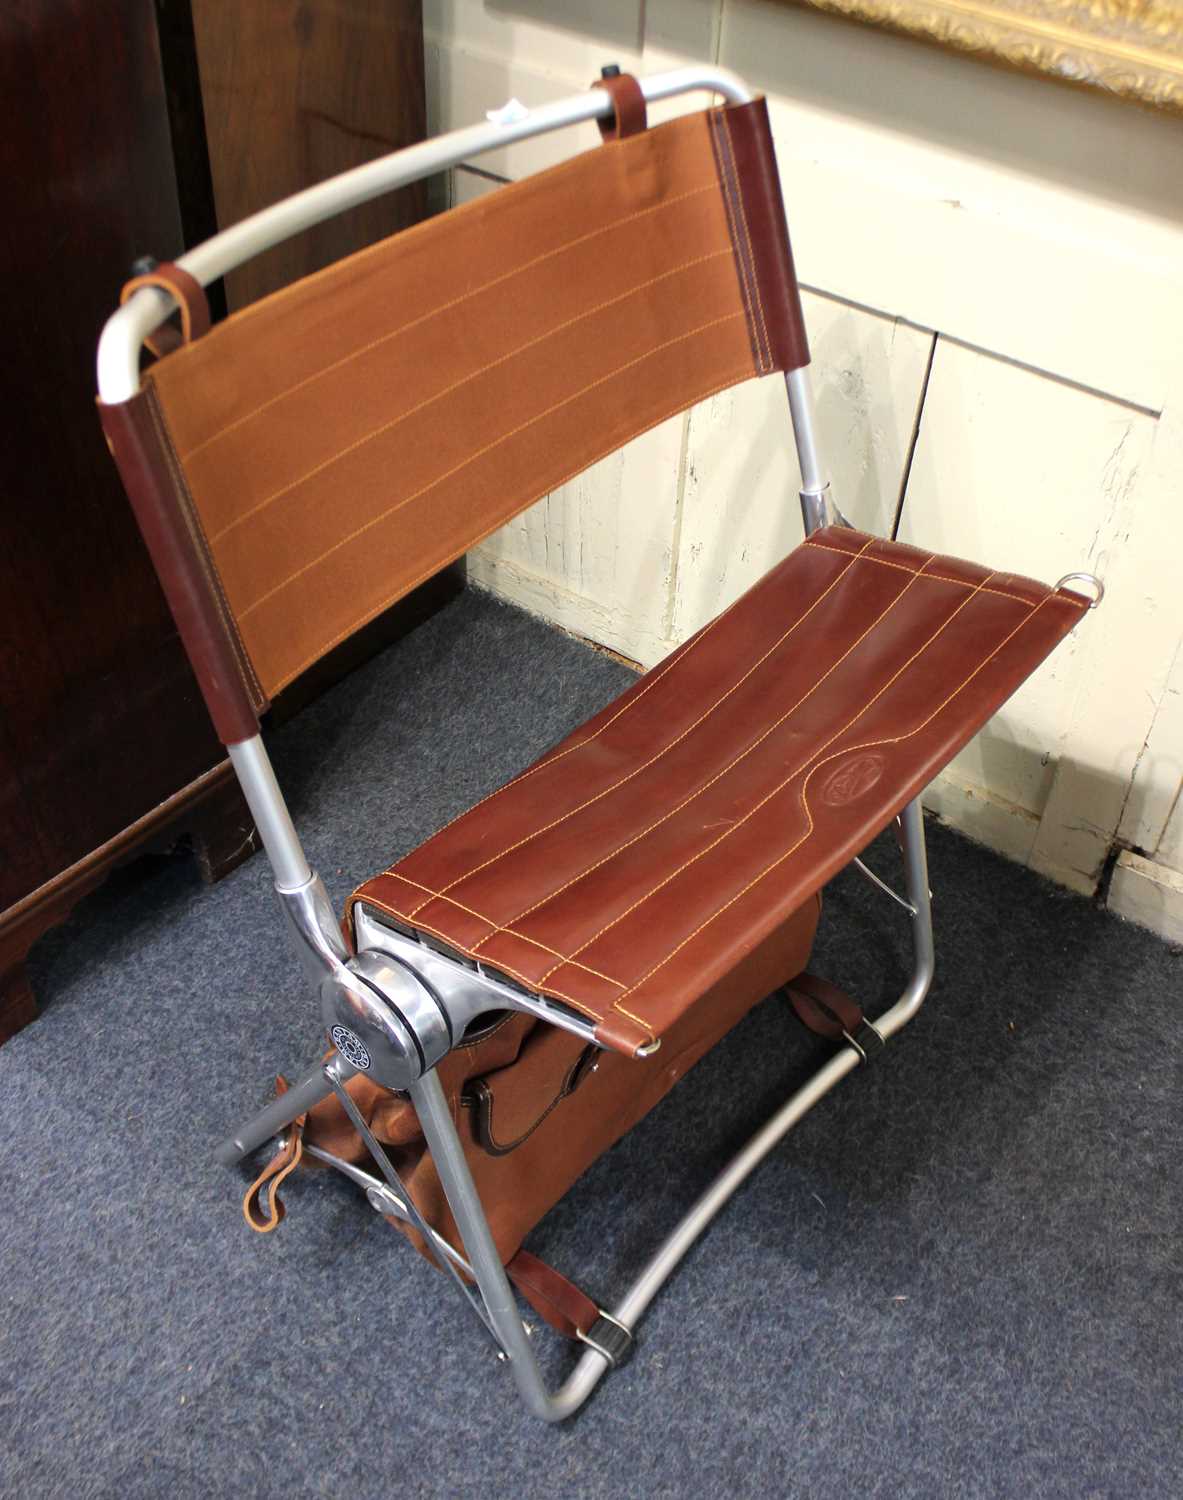 Bantam Manufacturing Co Ltd., a leather and aluminium 'The Bantam Chair' Folding Seat fitted with